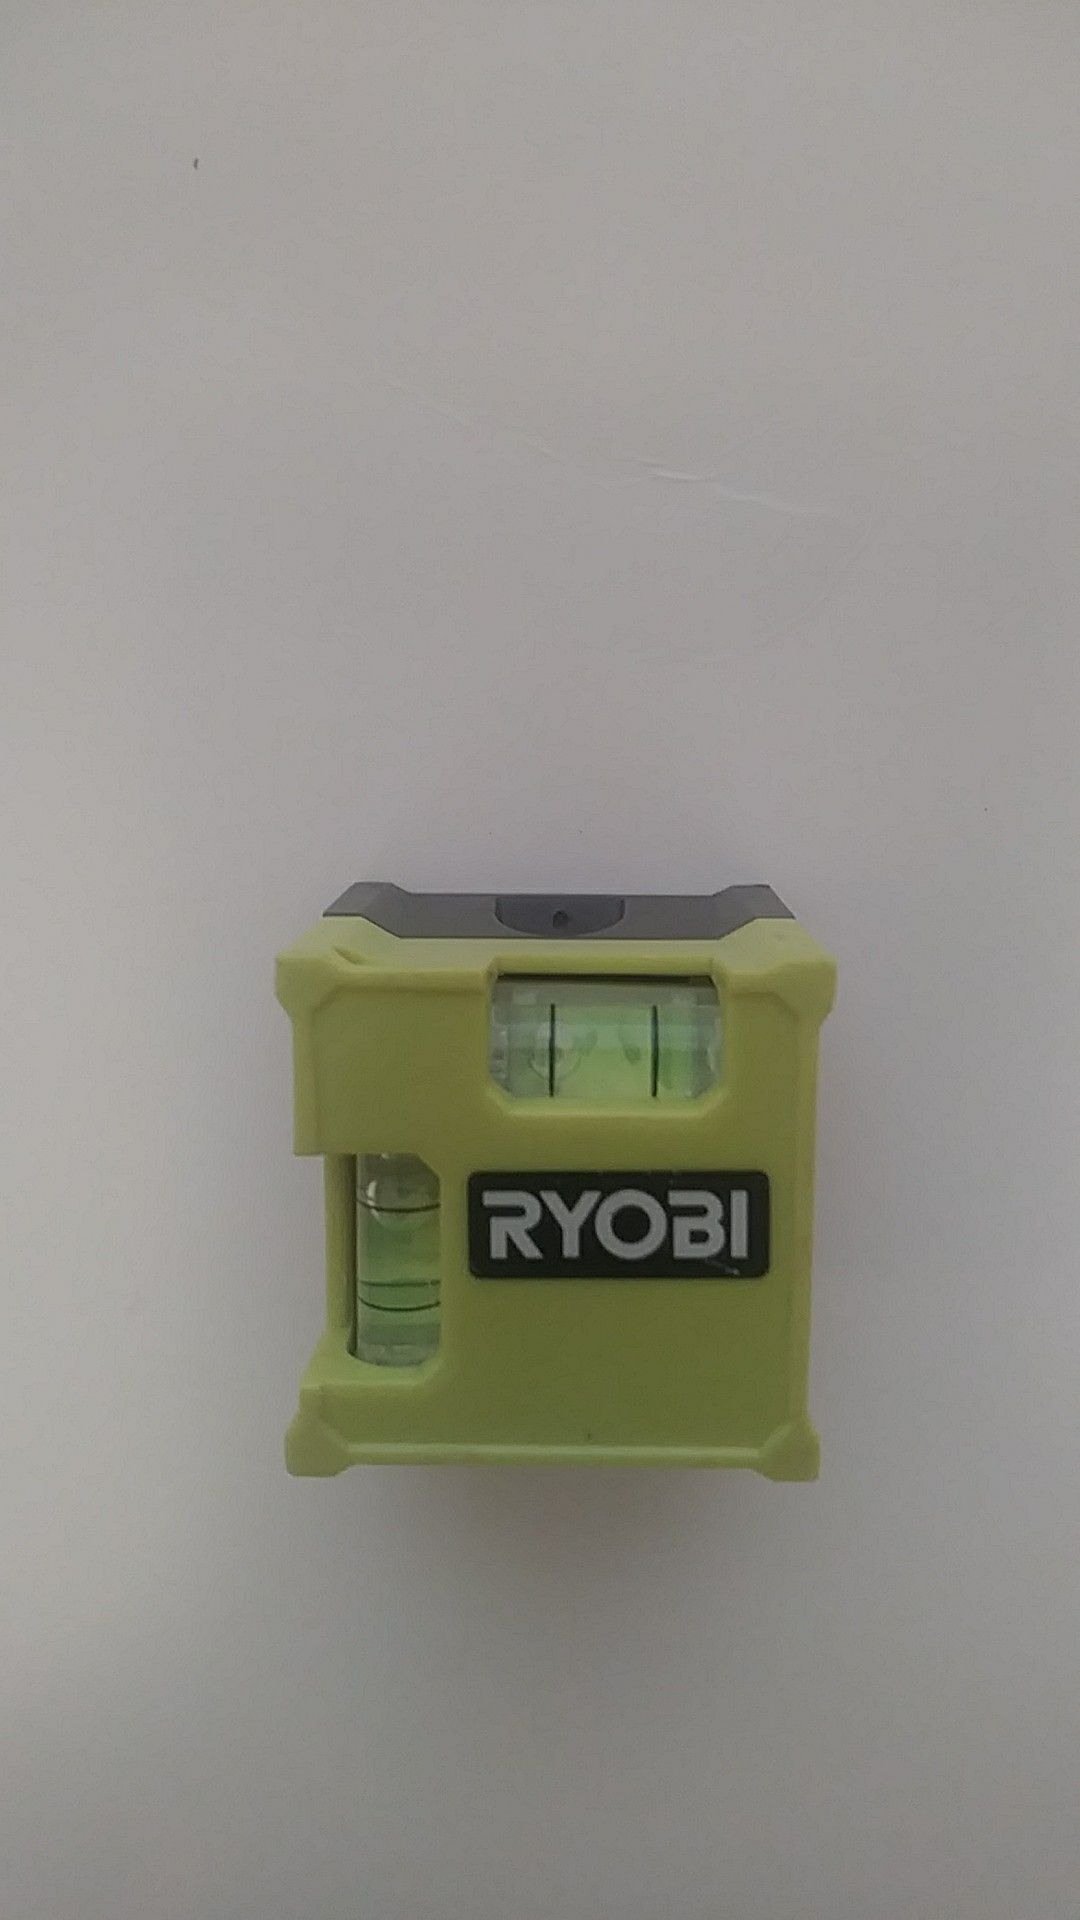 RyobiEll 1500 Laser cube compact level